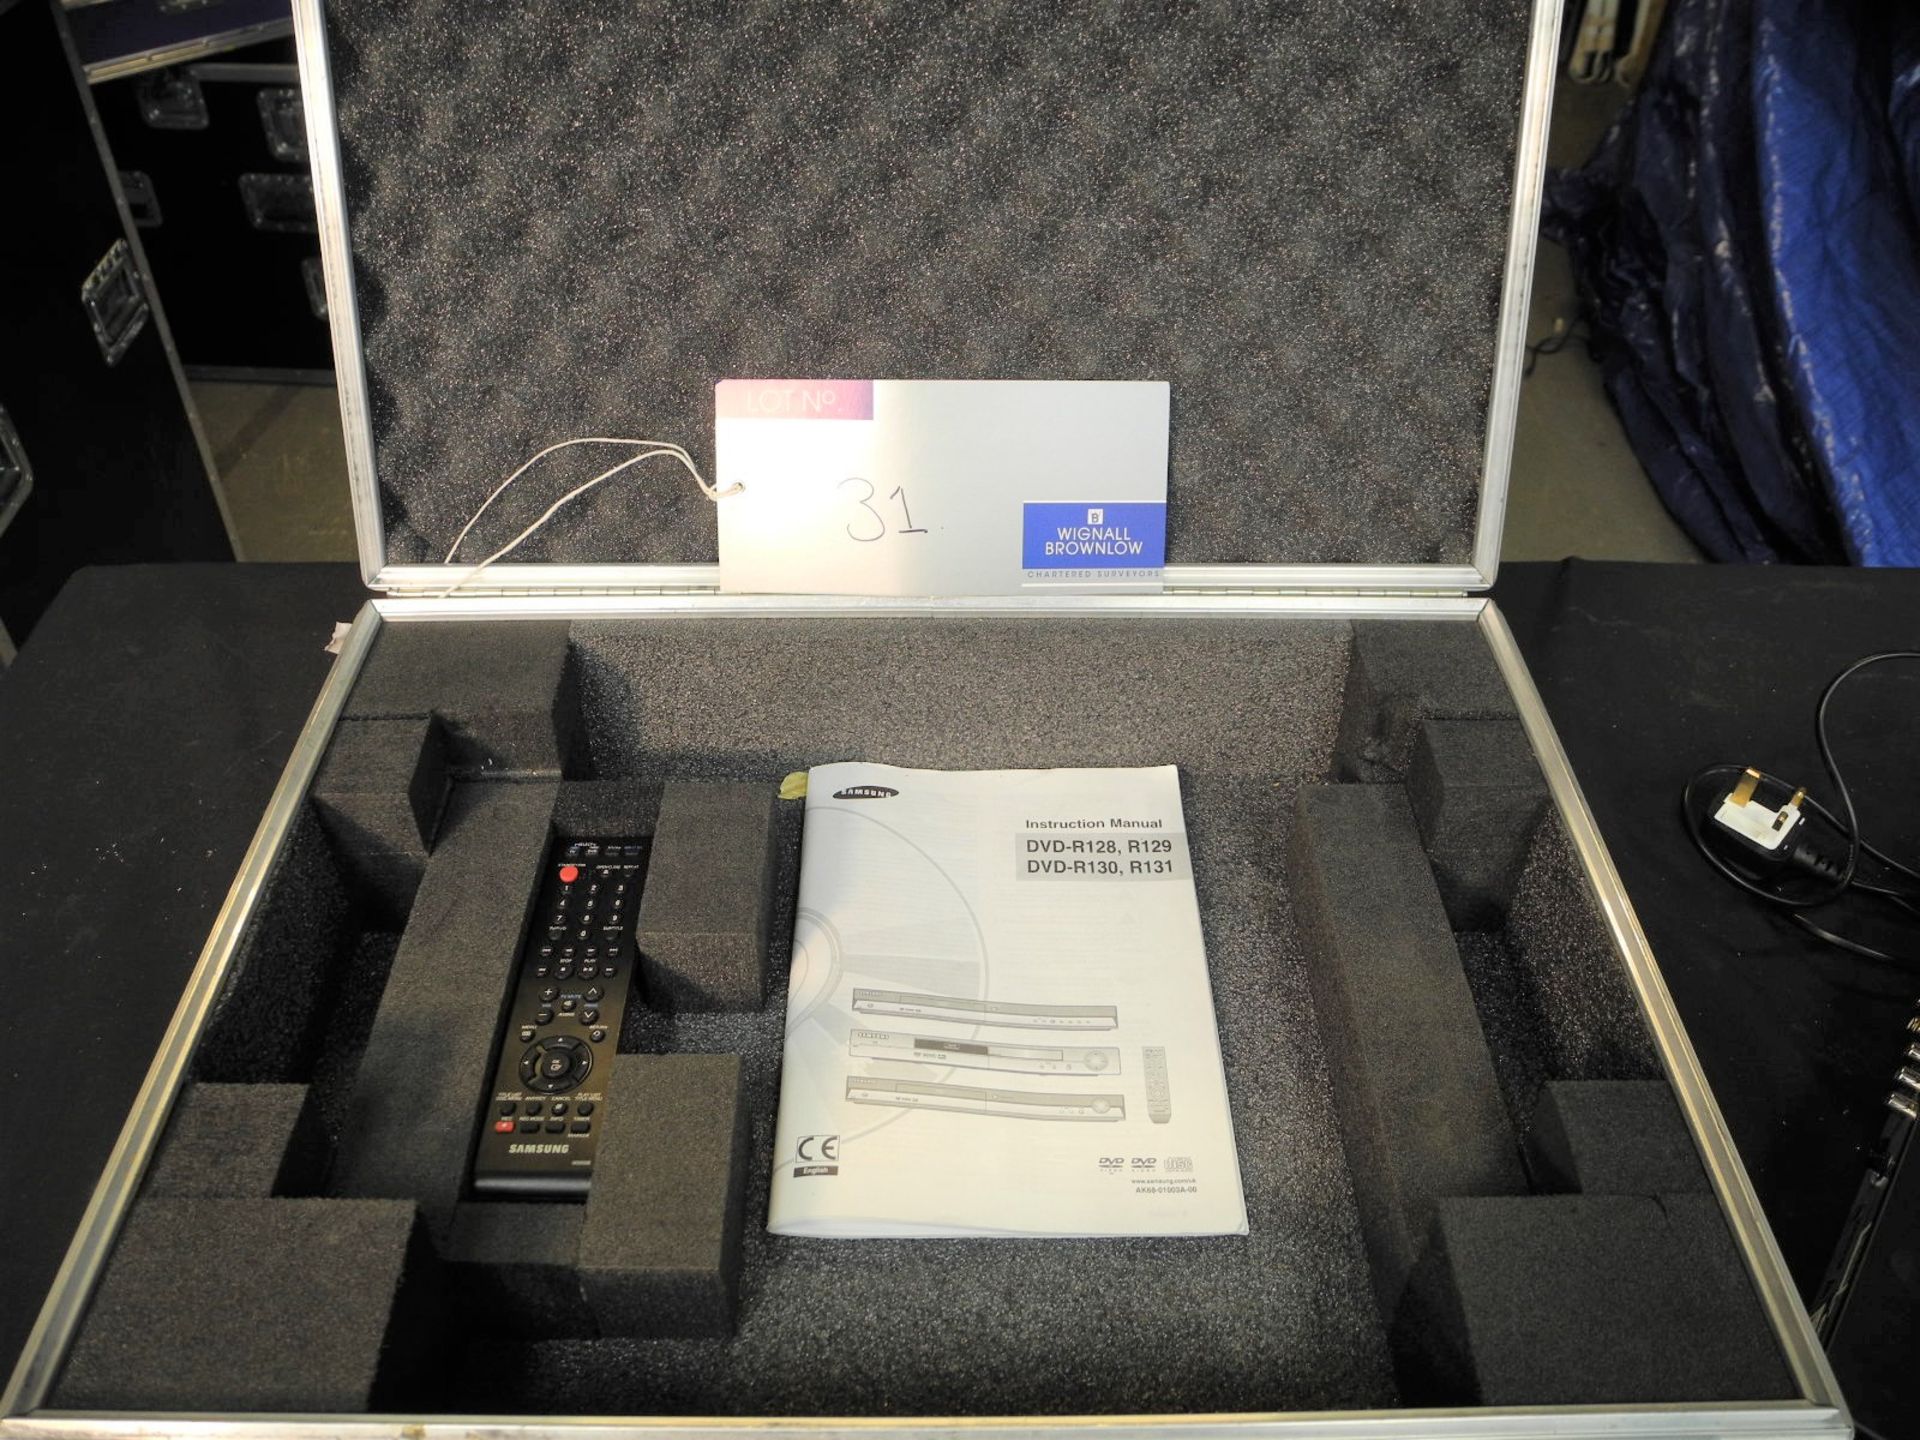 A Samsung DVD-R129 DVD Recorder in flight case, good condition-located at PR Live, Unit 6, Windsor - Image 2 of 3